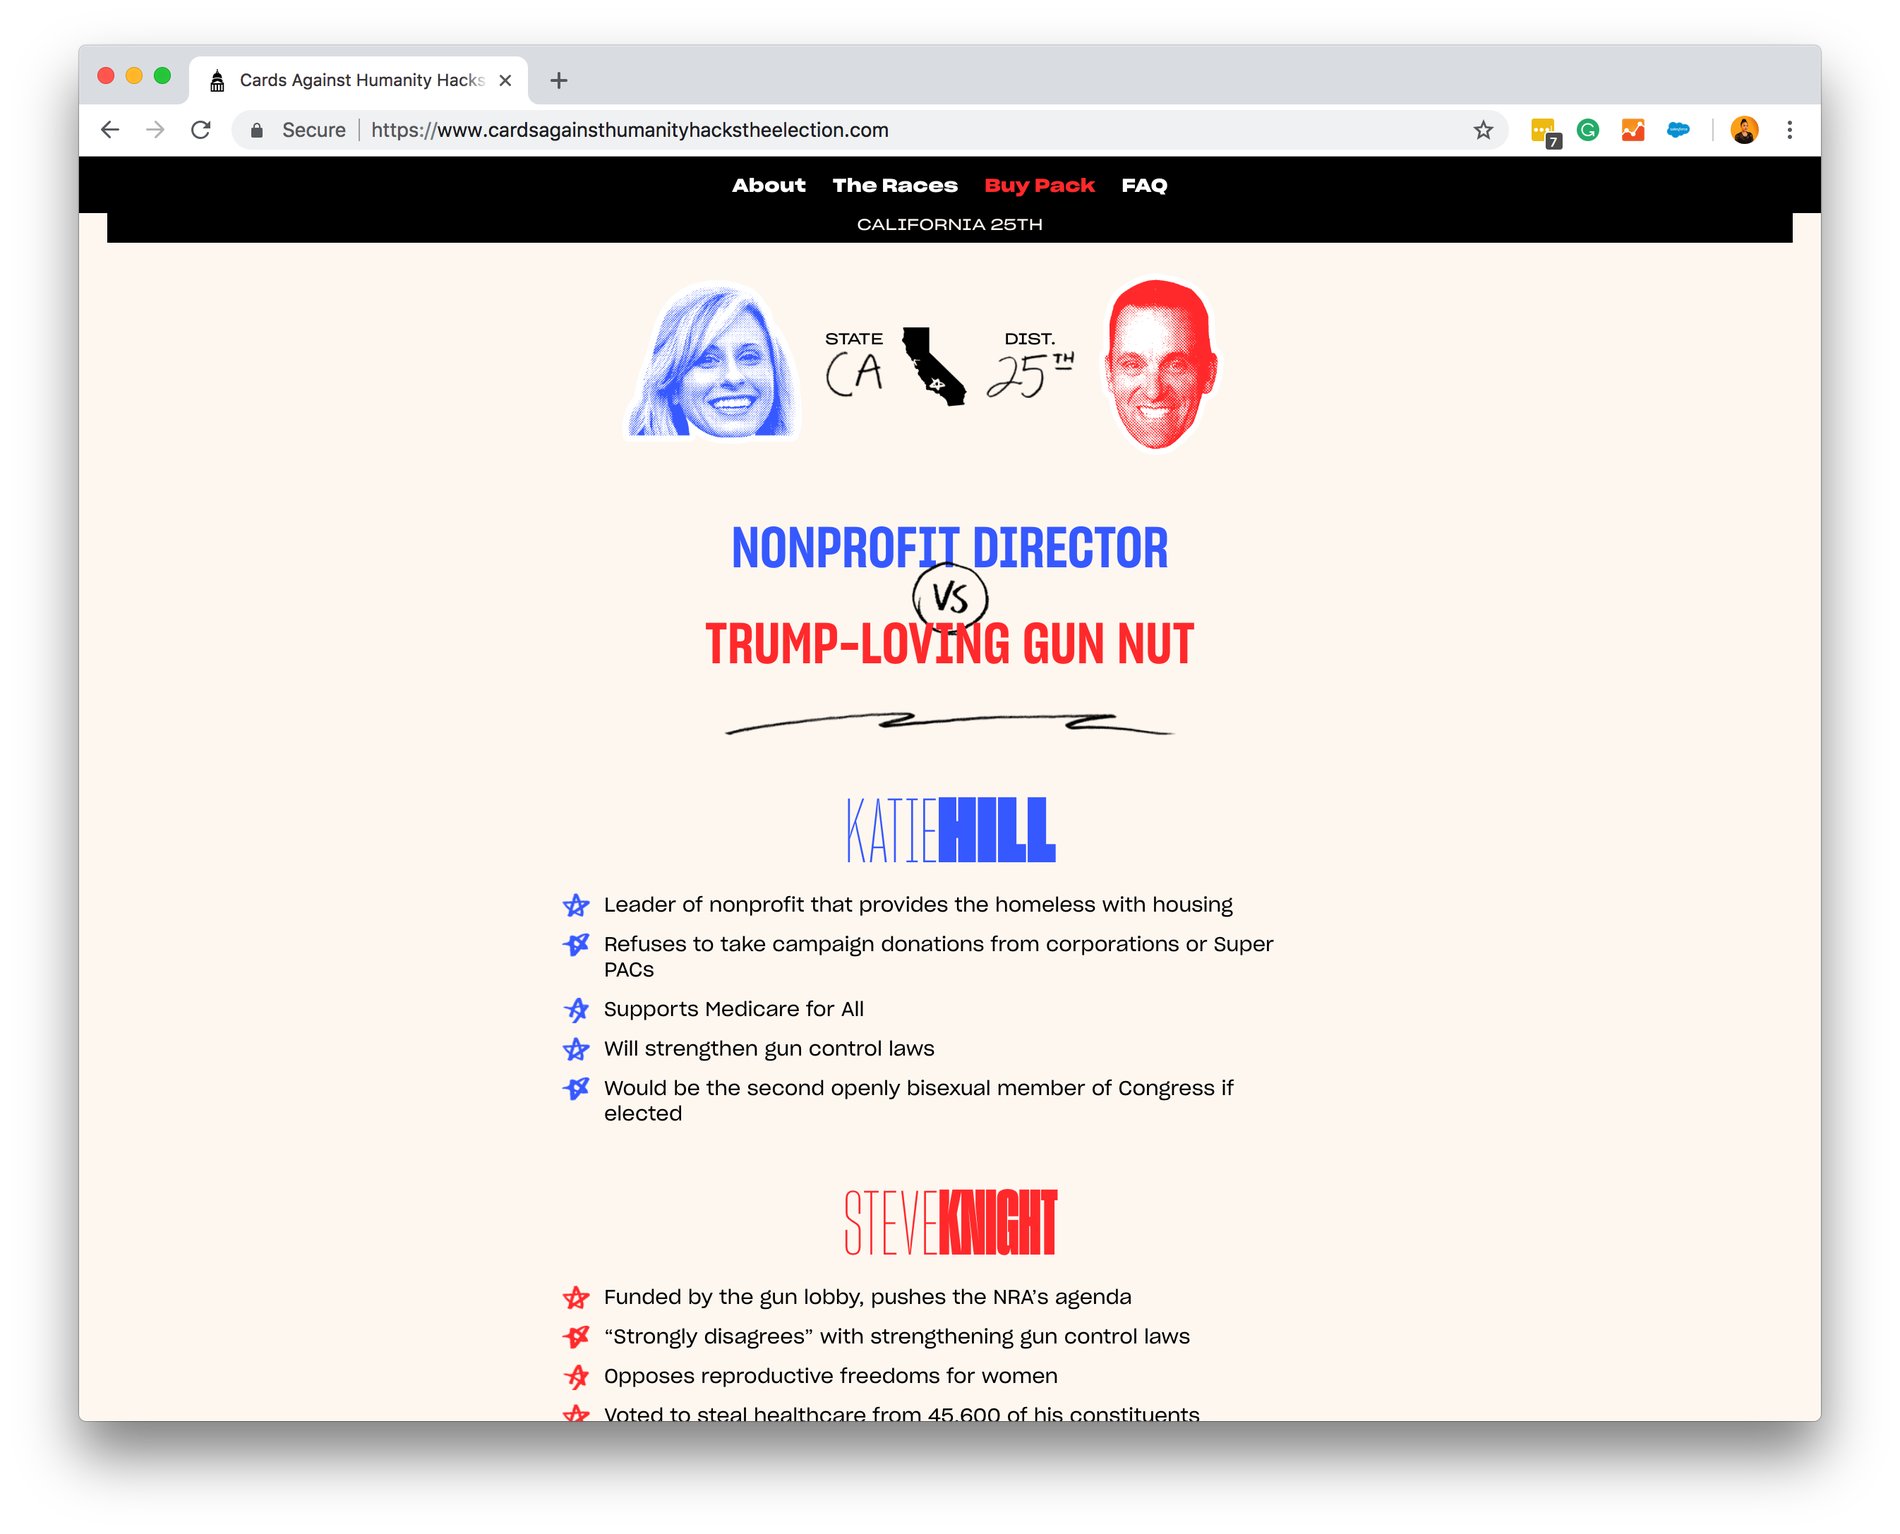 Sharp-Type-Cards-Against-Humanity-Hacks-Election-Web-CA-3